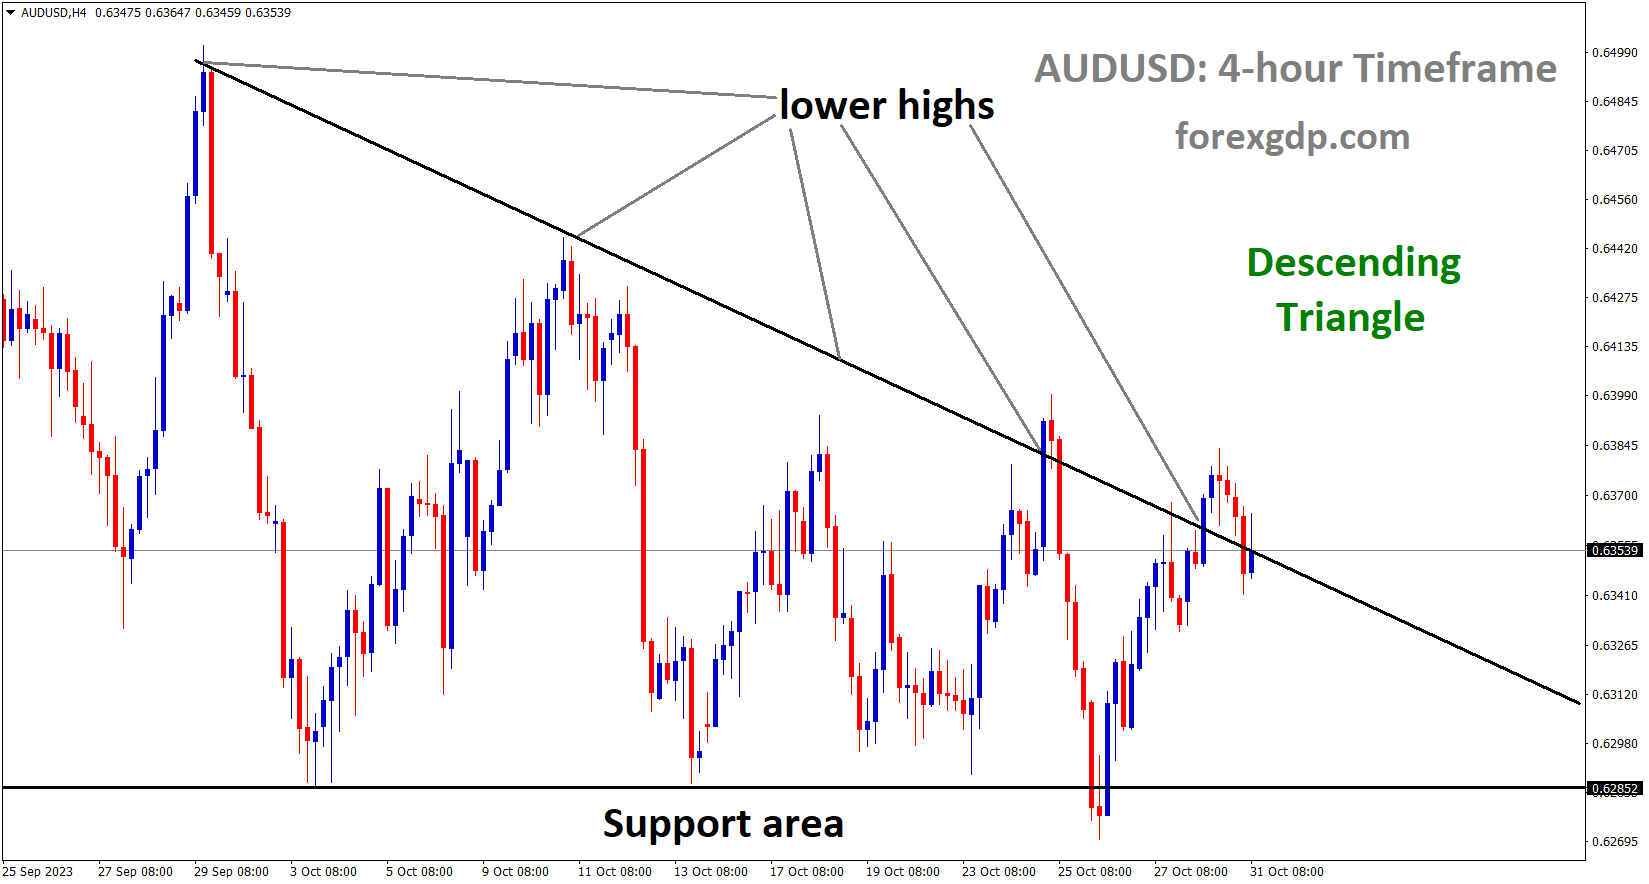 AUDUSD is moving in the Descending triangle pattern and the market has fallen from the lower high area of the pattern